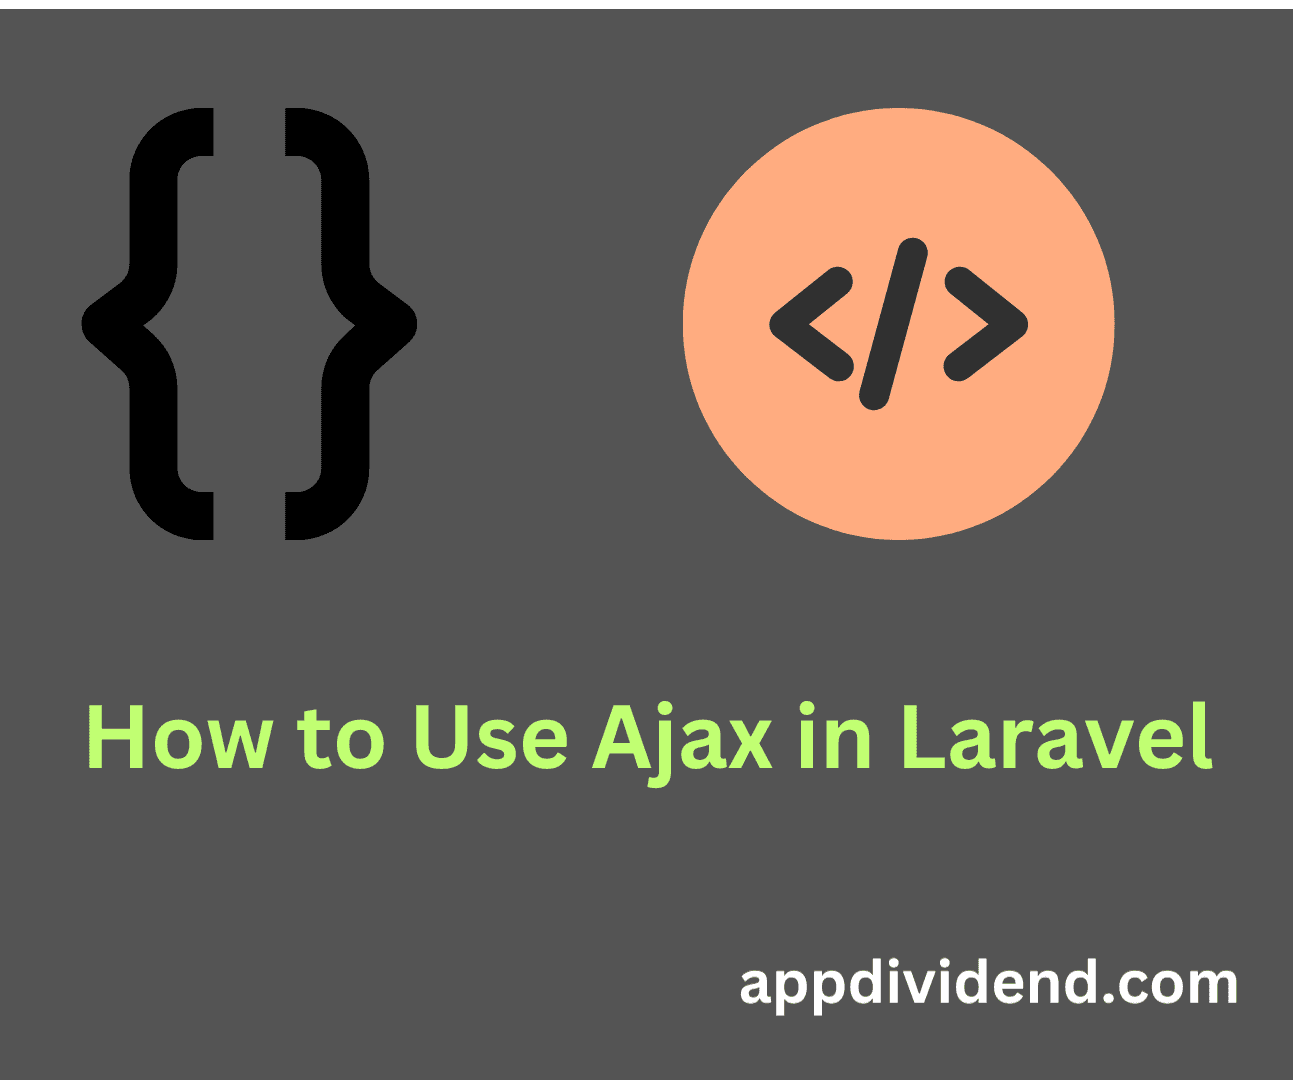 How to Use Ajax in Laravel